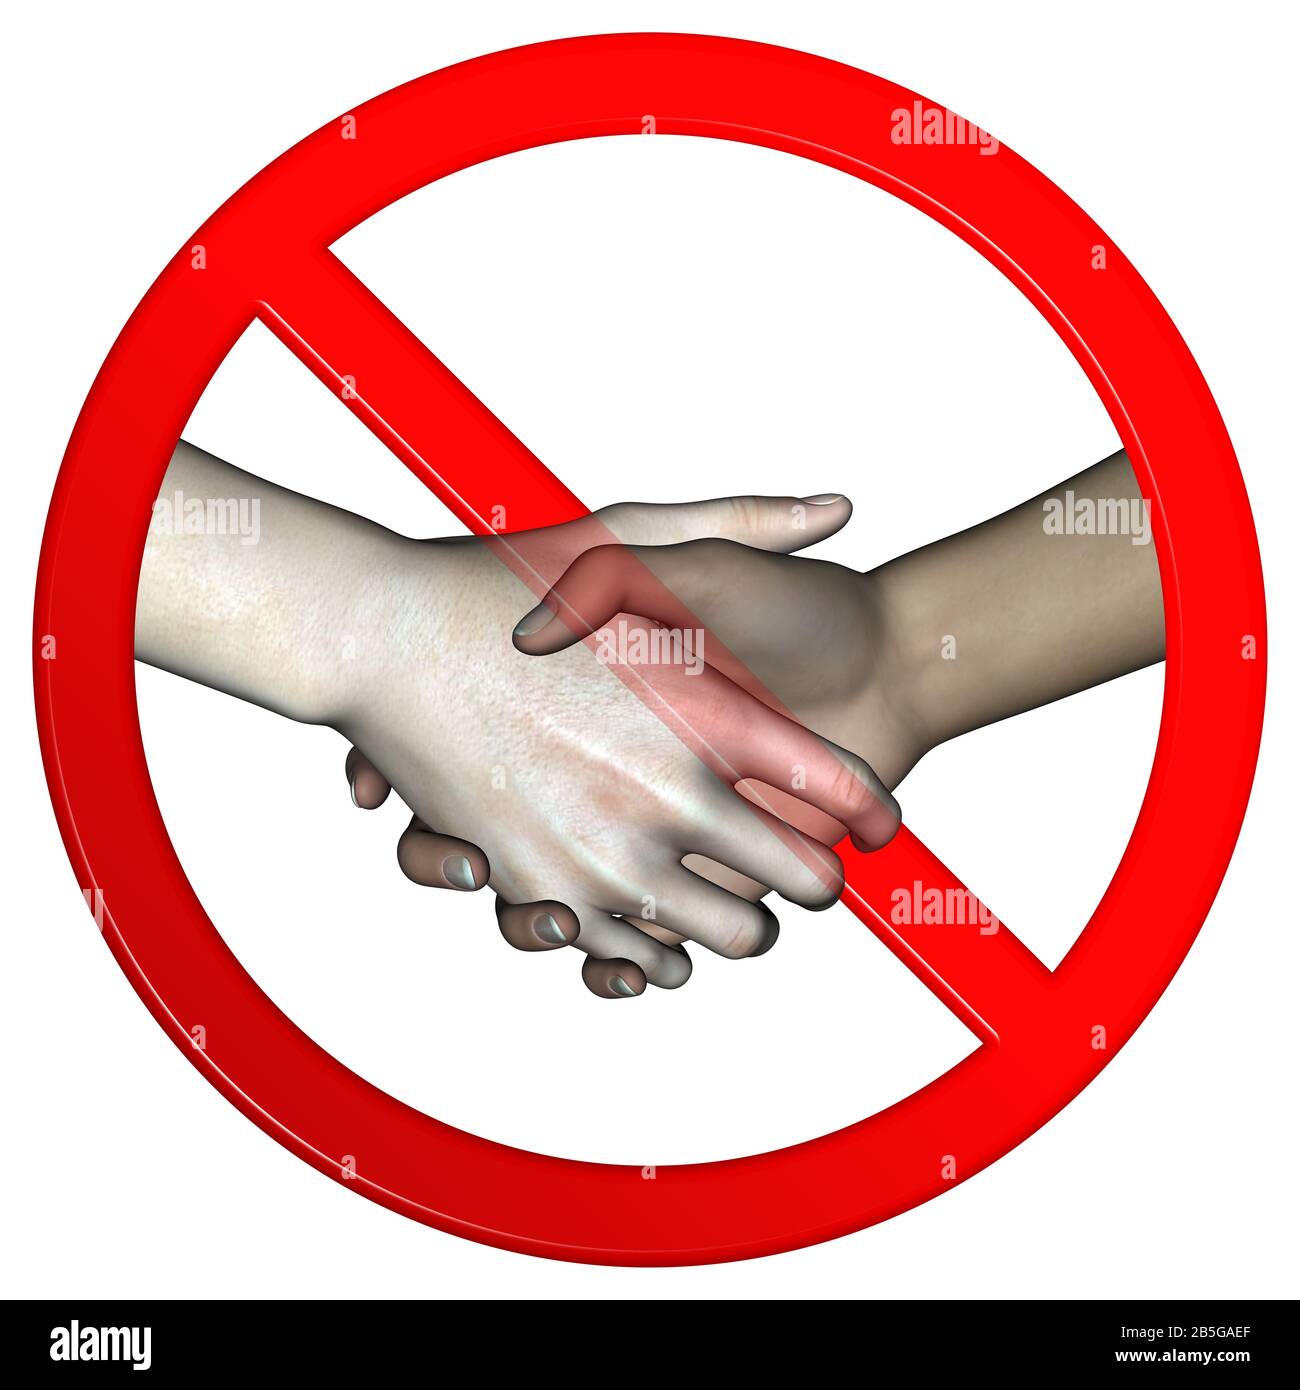 No hand shaking sign to avoid virus and bacteria spreading between people with two illustration computer generated hands Stock Photo